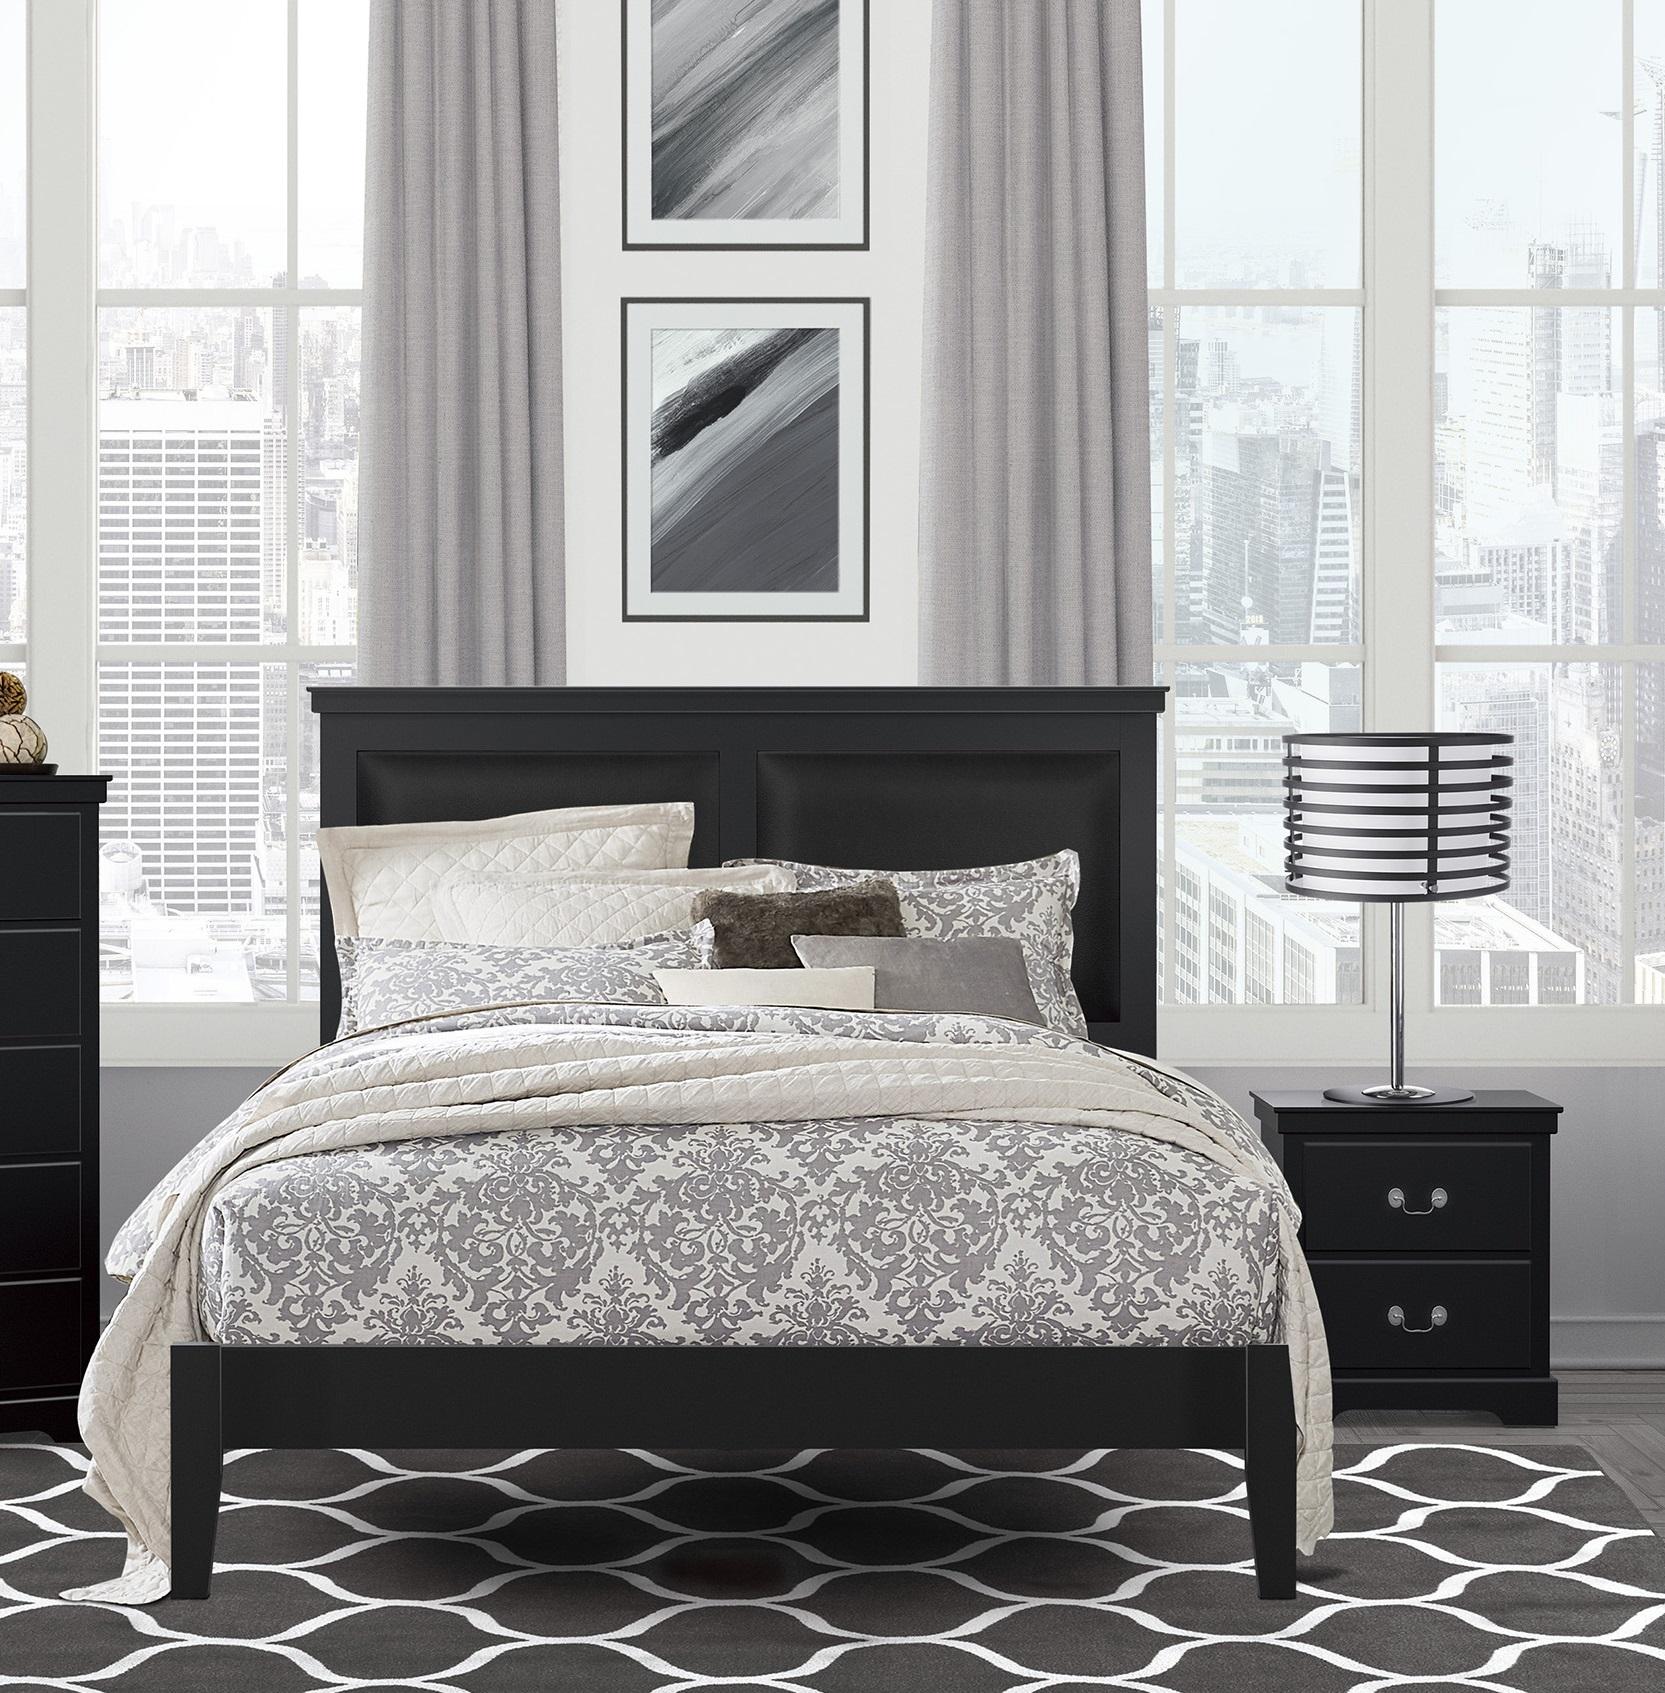 Modern Bedroom Set 1519BKF-1-3PC Seabright 1519BKF-1-3PC in Black Faux Leather